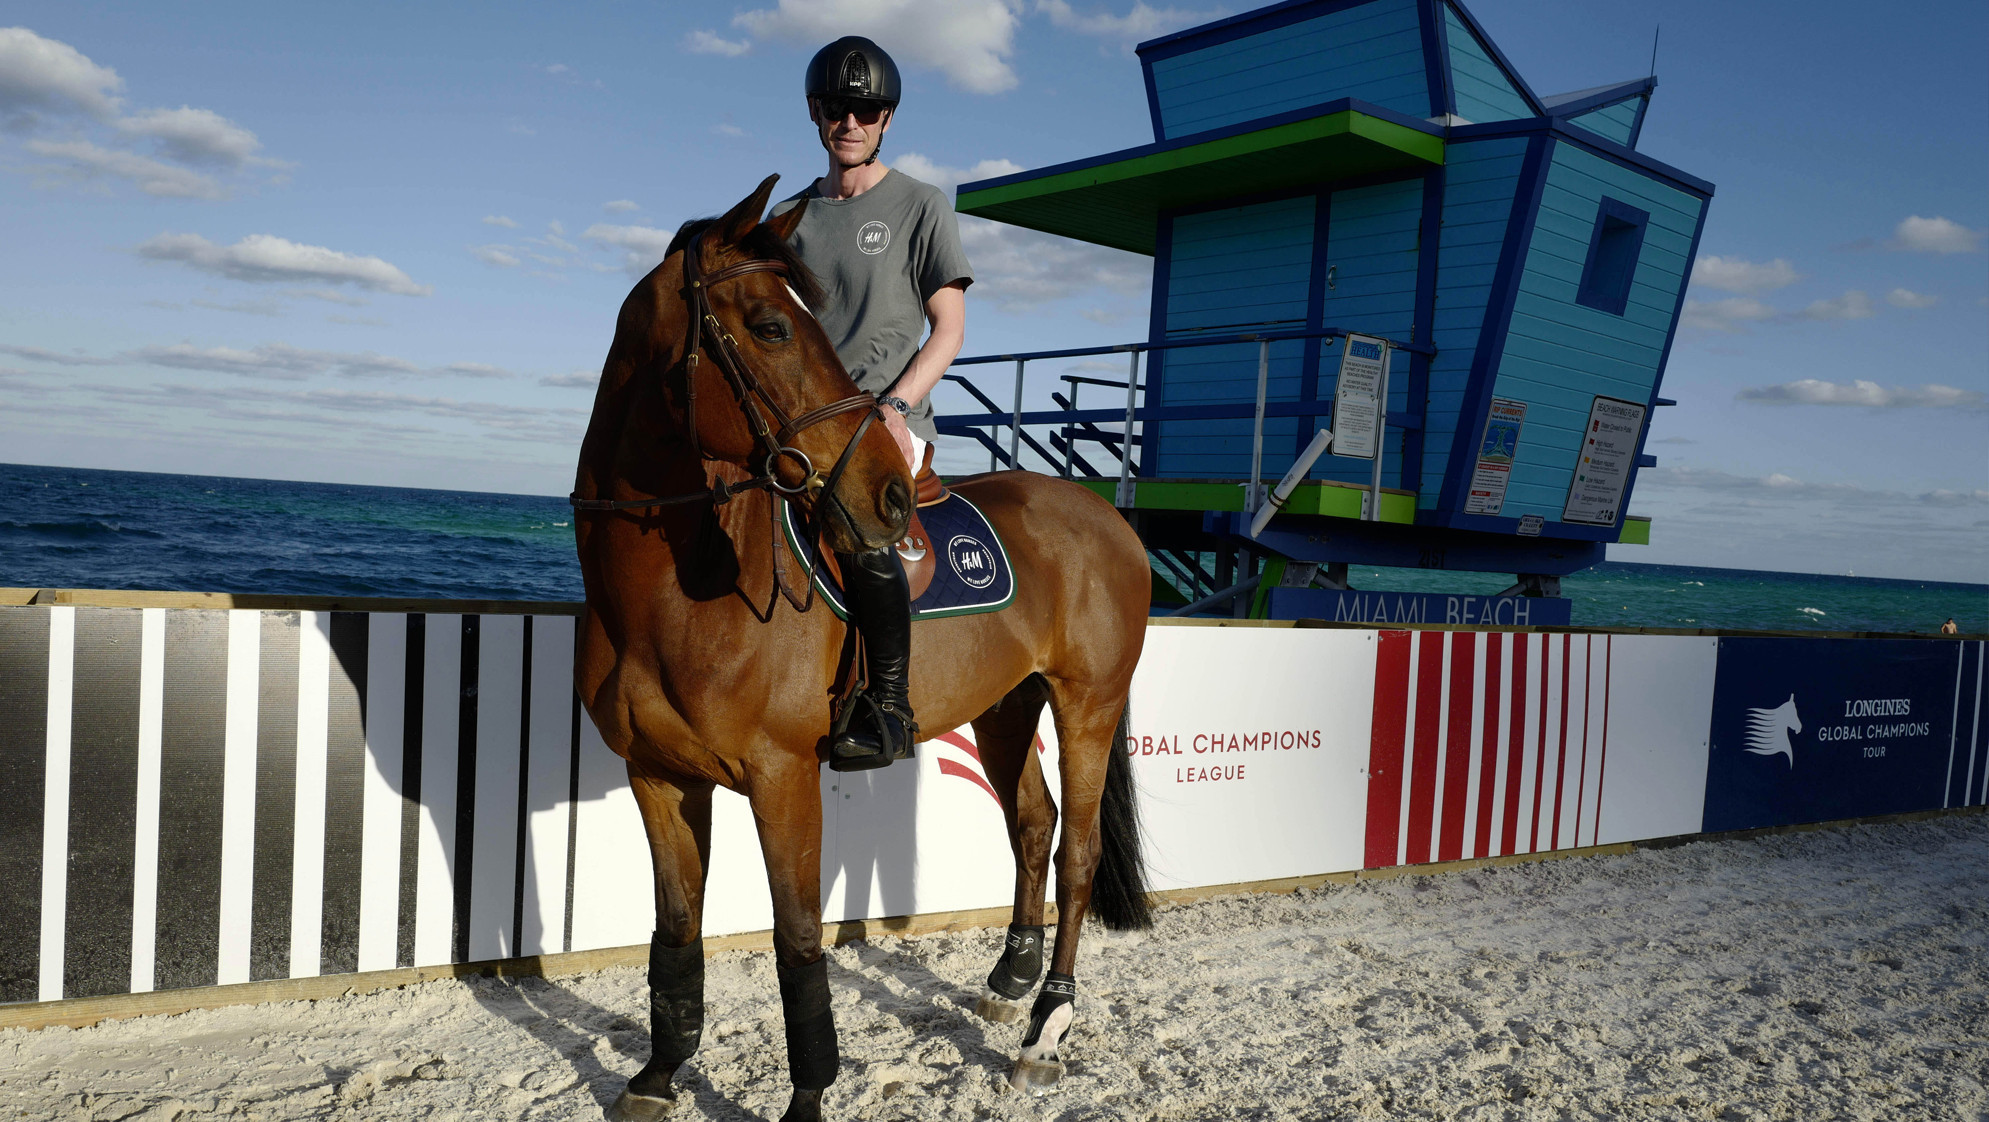 Guery searching for another win with horse power aplenty at Longines Global Champions Tour event in Miami Beach